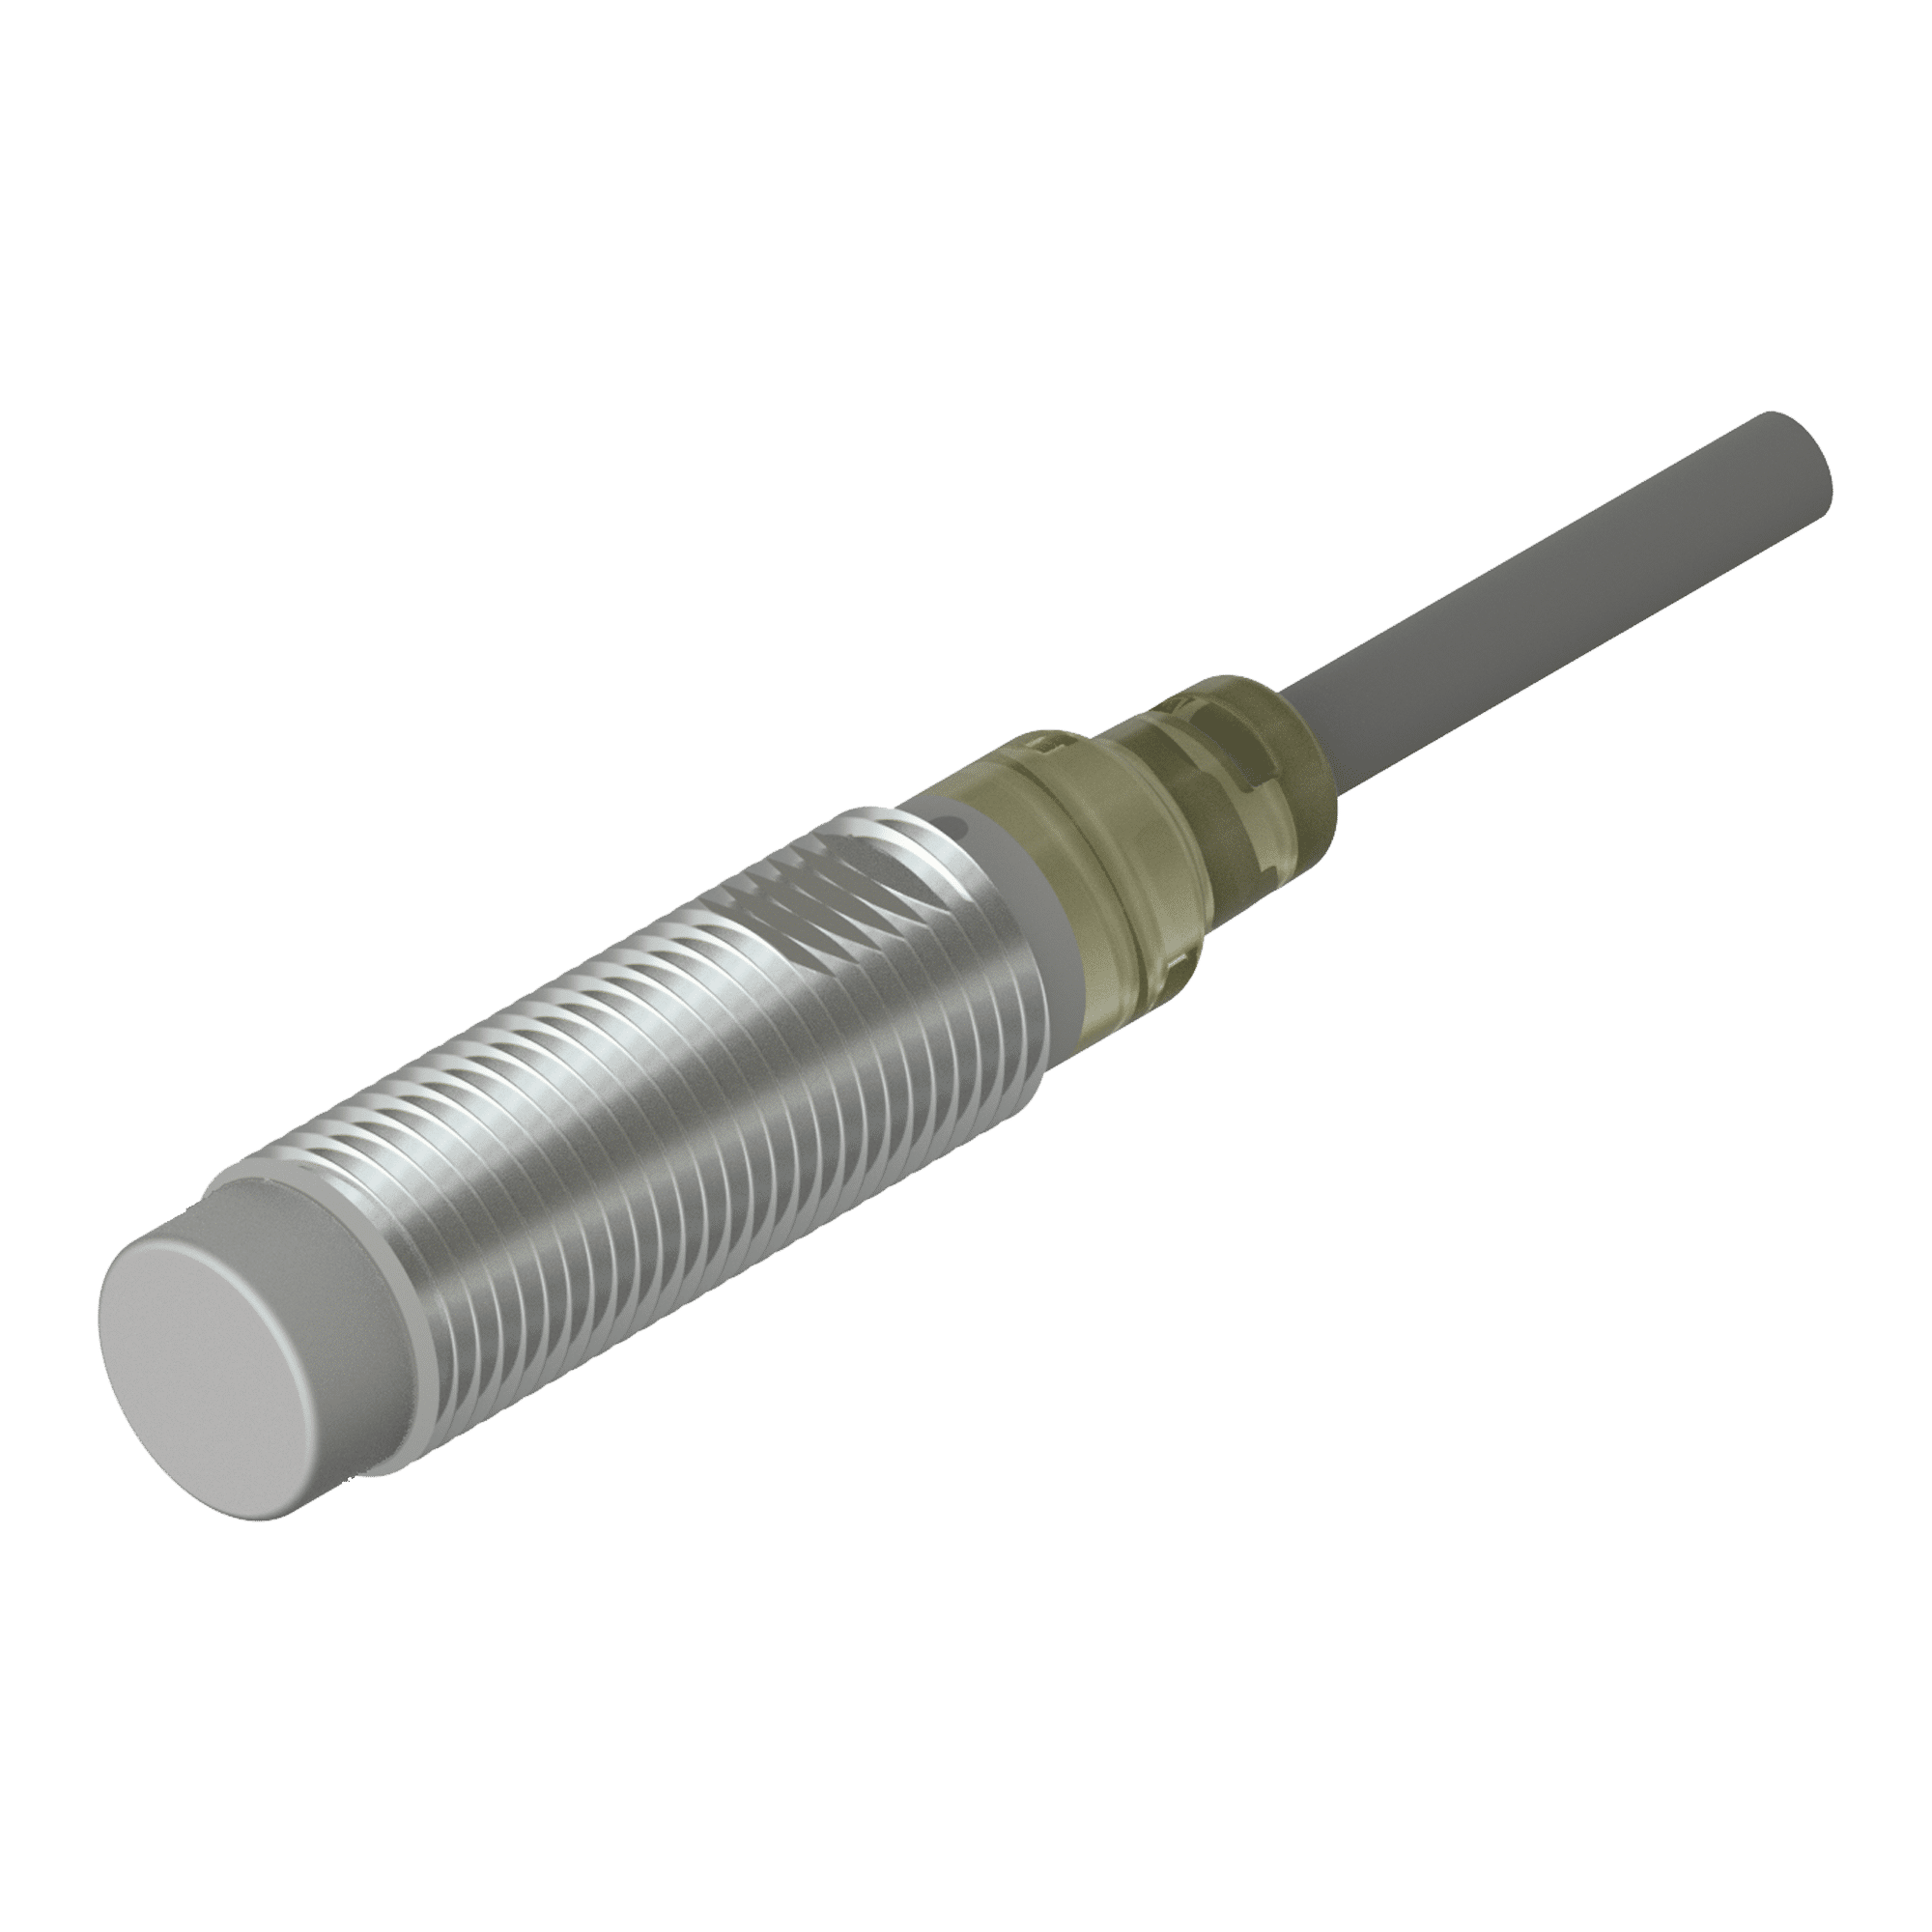 Inductive round sensor M12  Length 30mm with 2m PVC cable connection